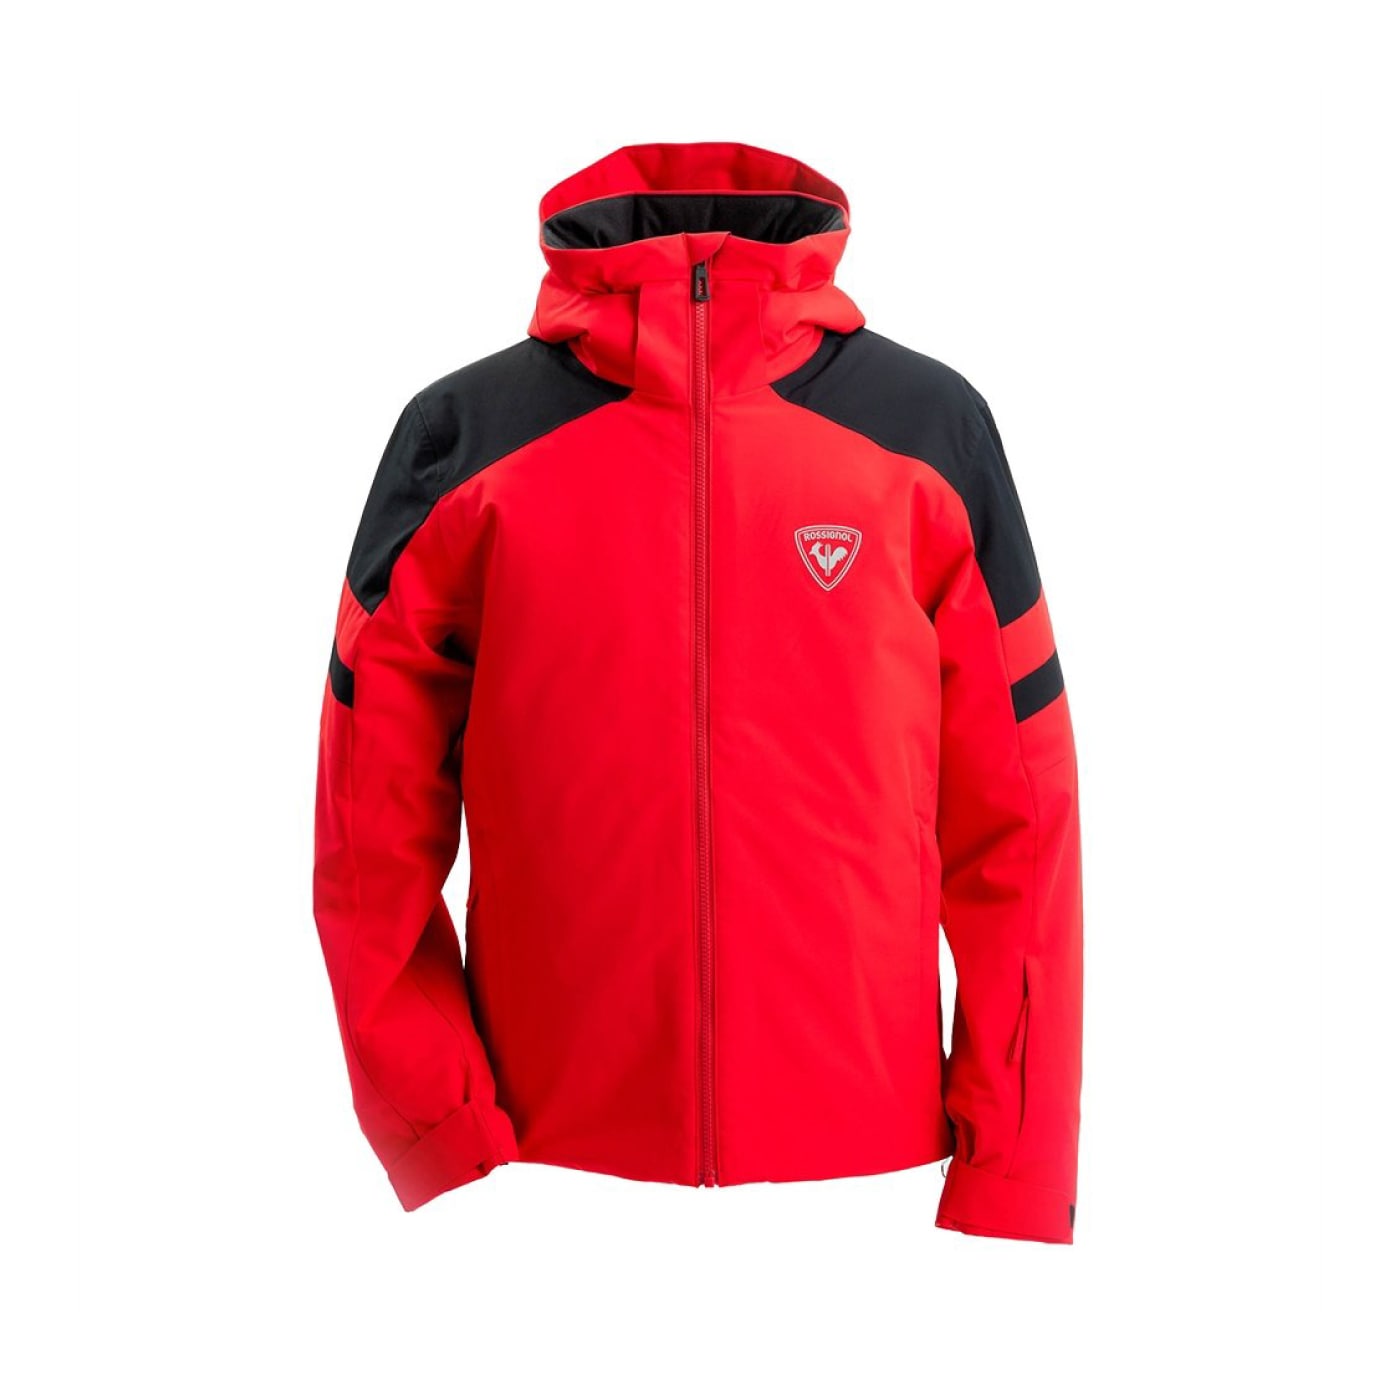 Rossignol Men's Section Jacket 301 SPORTS RED